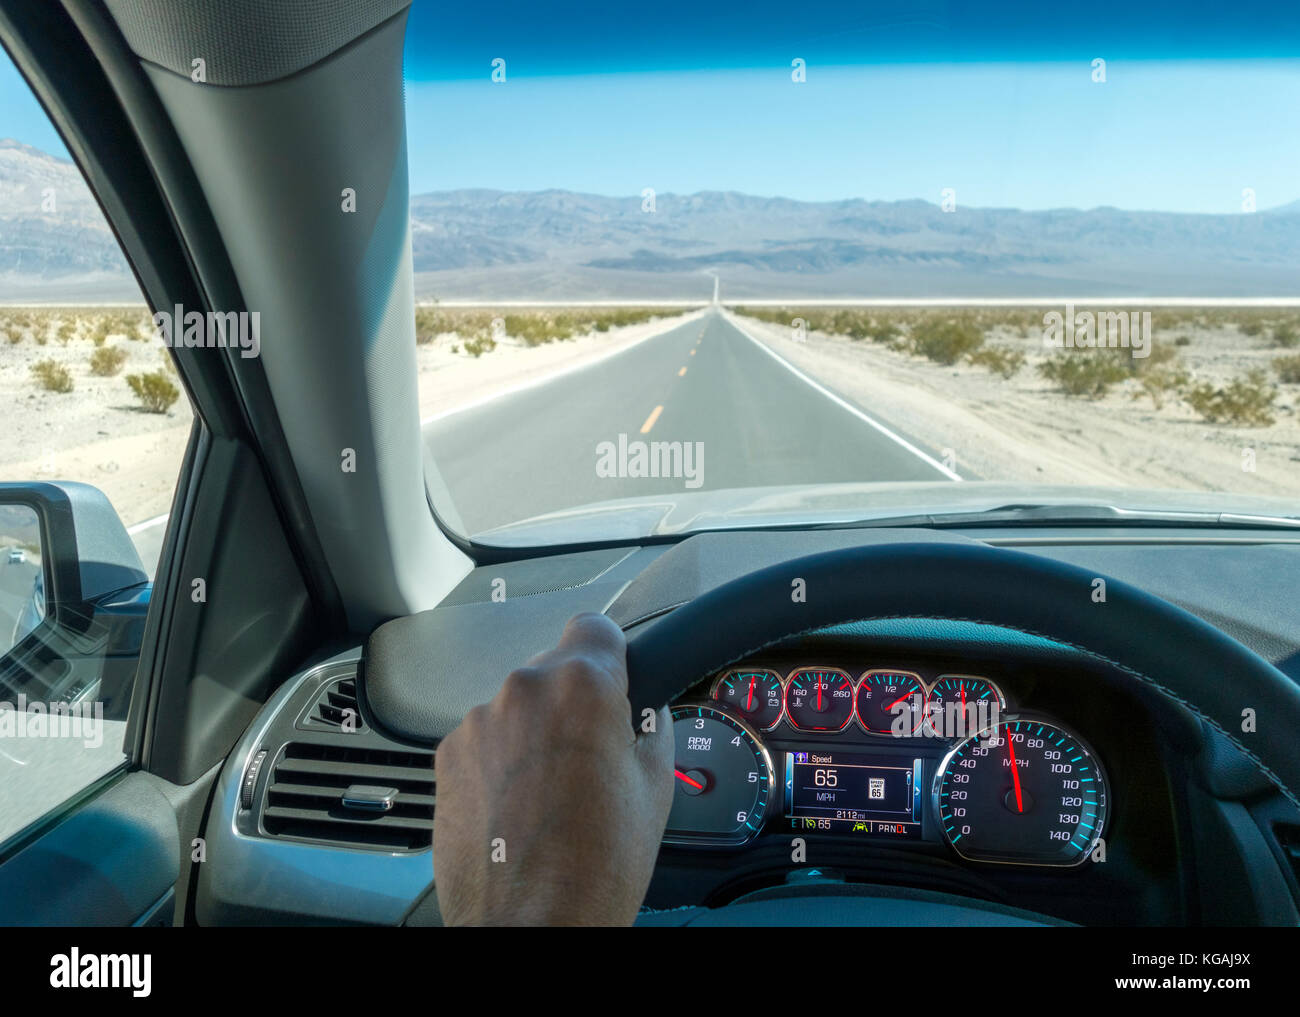 Death Valley Scenic Byway. Road trip driving point of view with dashboard and cruise control at 65mph. 65 mph speed limit on digital dashboard. Stock Photo